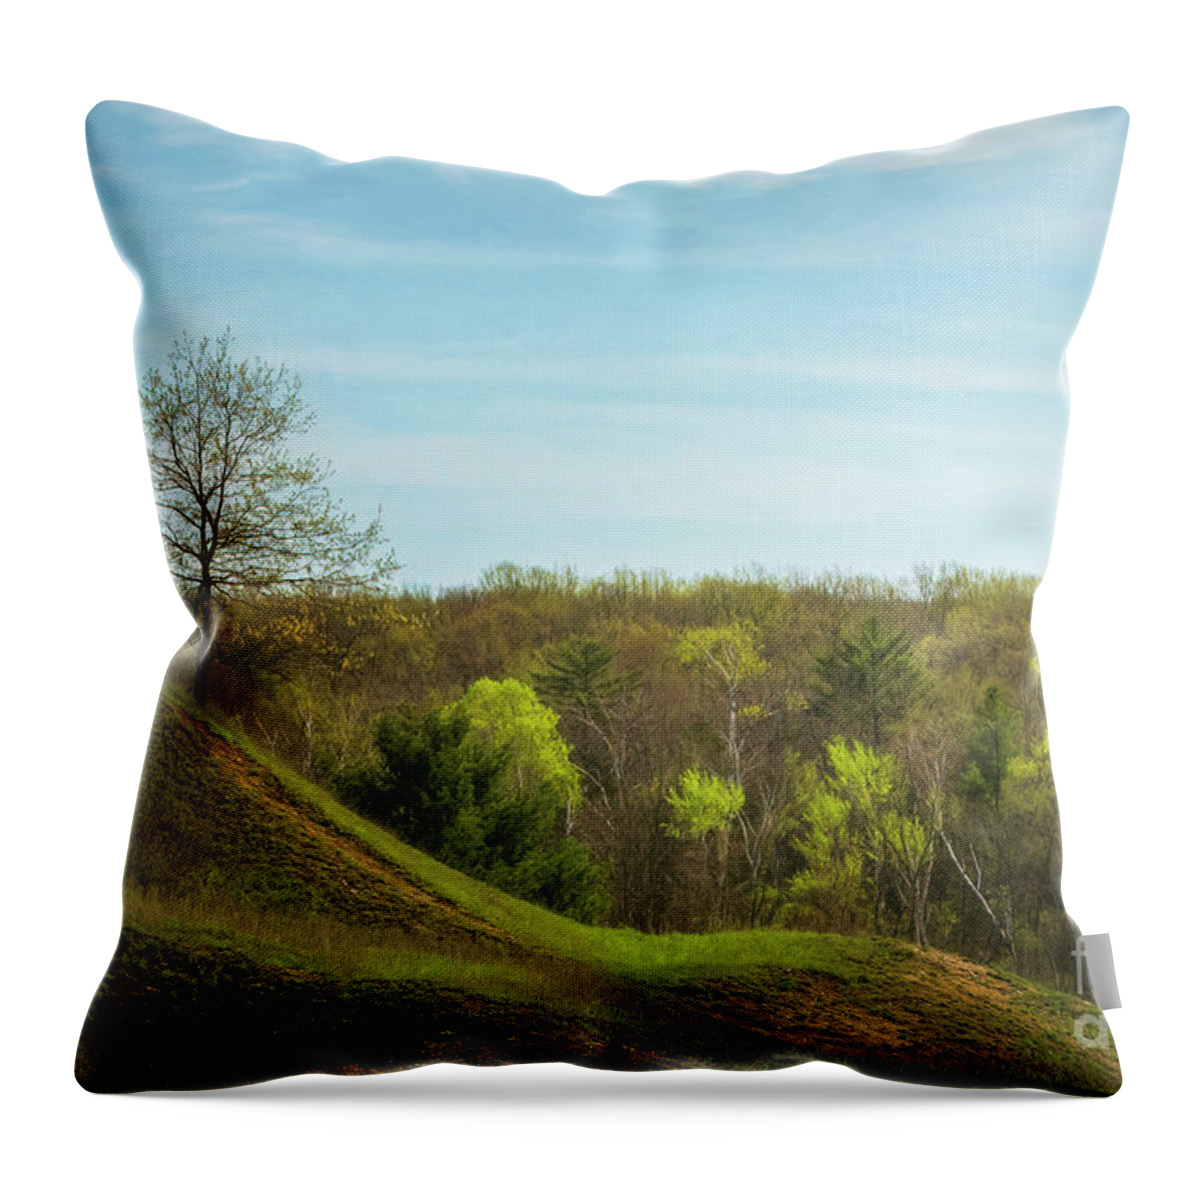 Nature Throw Pillow featuring the photograph Whitcomb Creek Bud Break by Trey Foerster